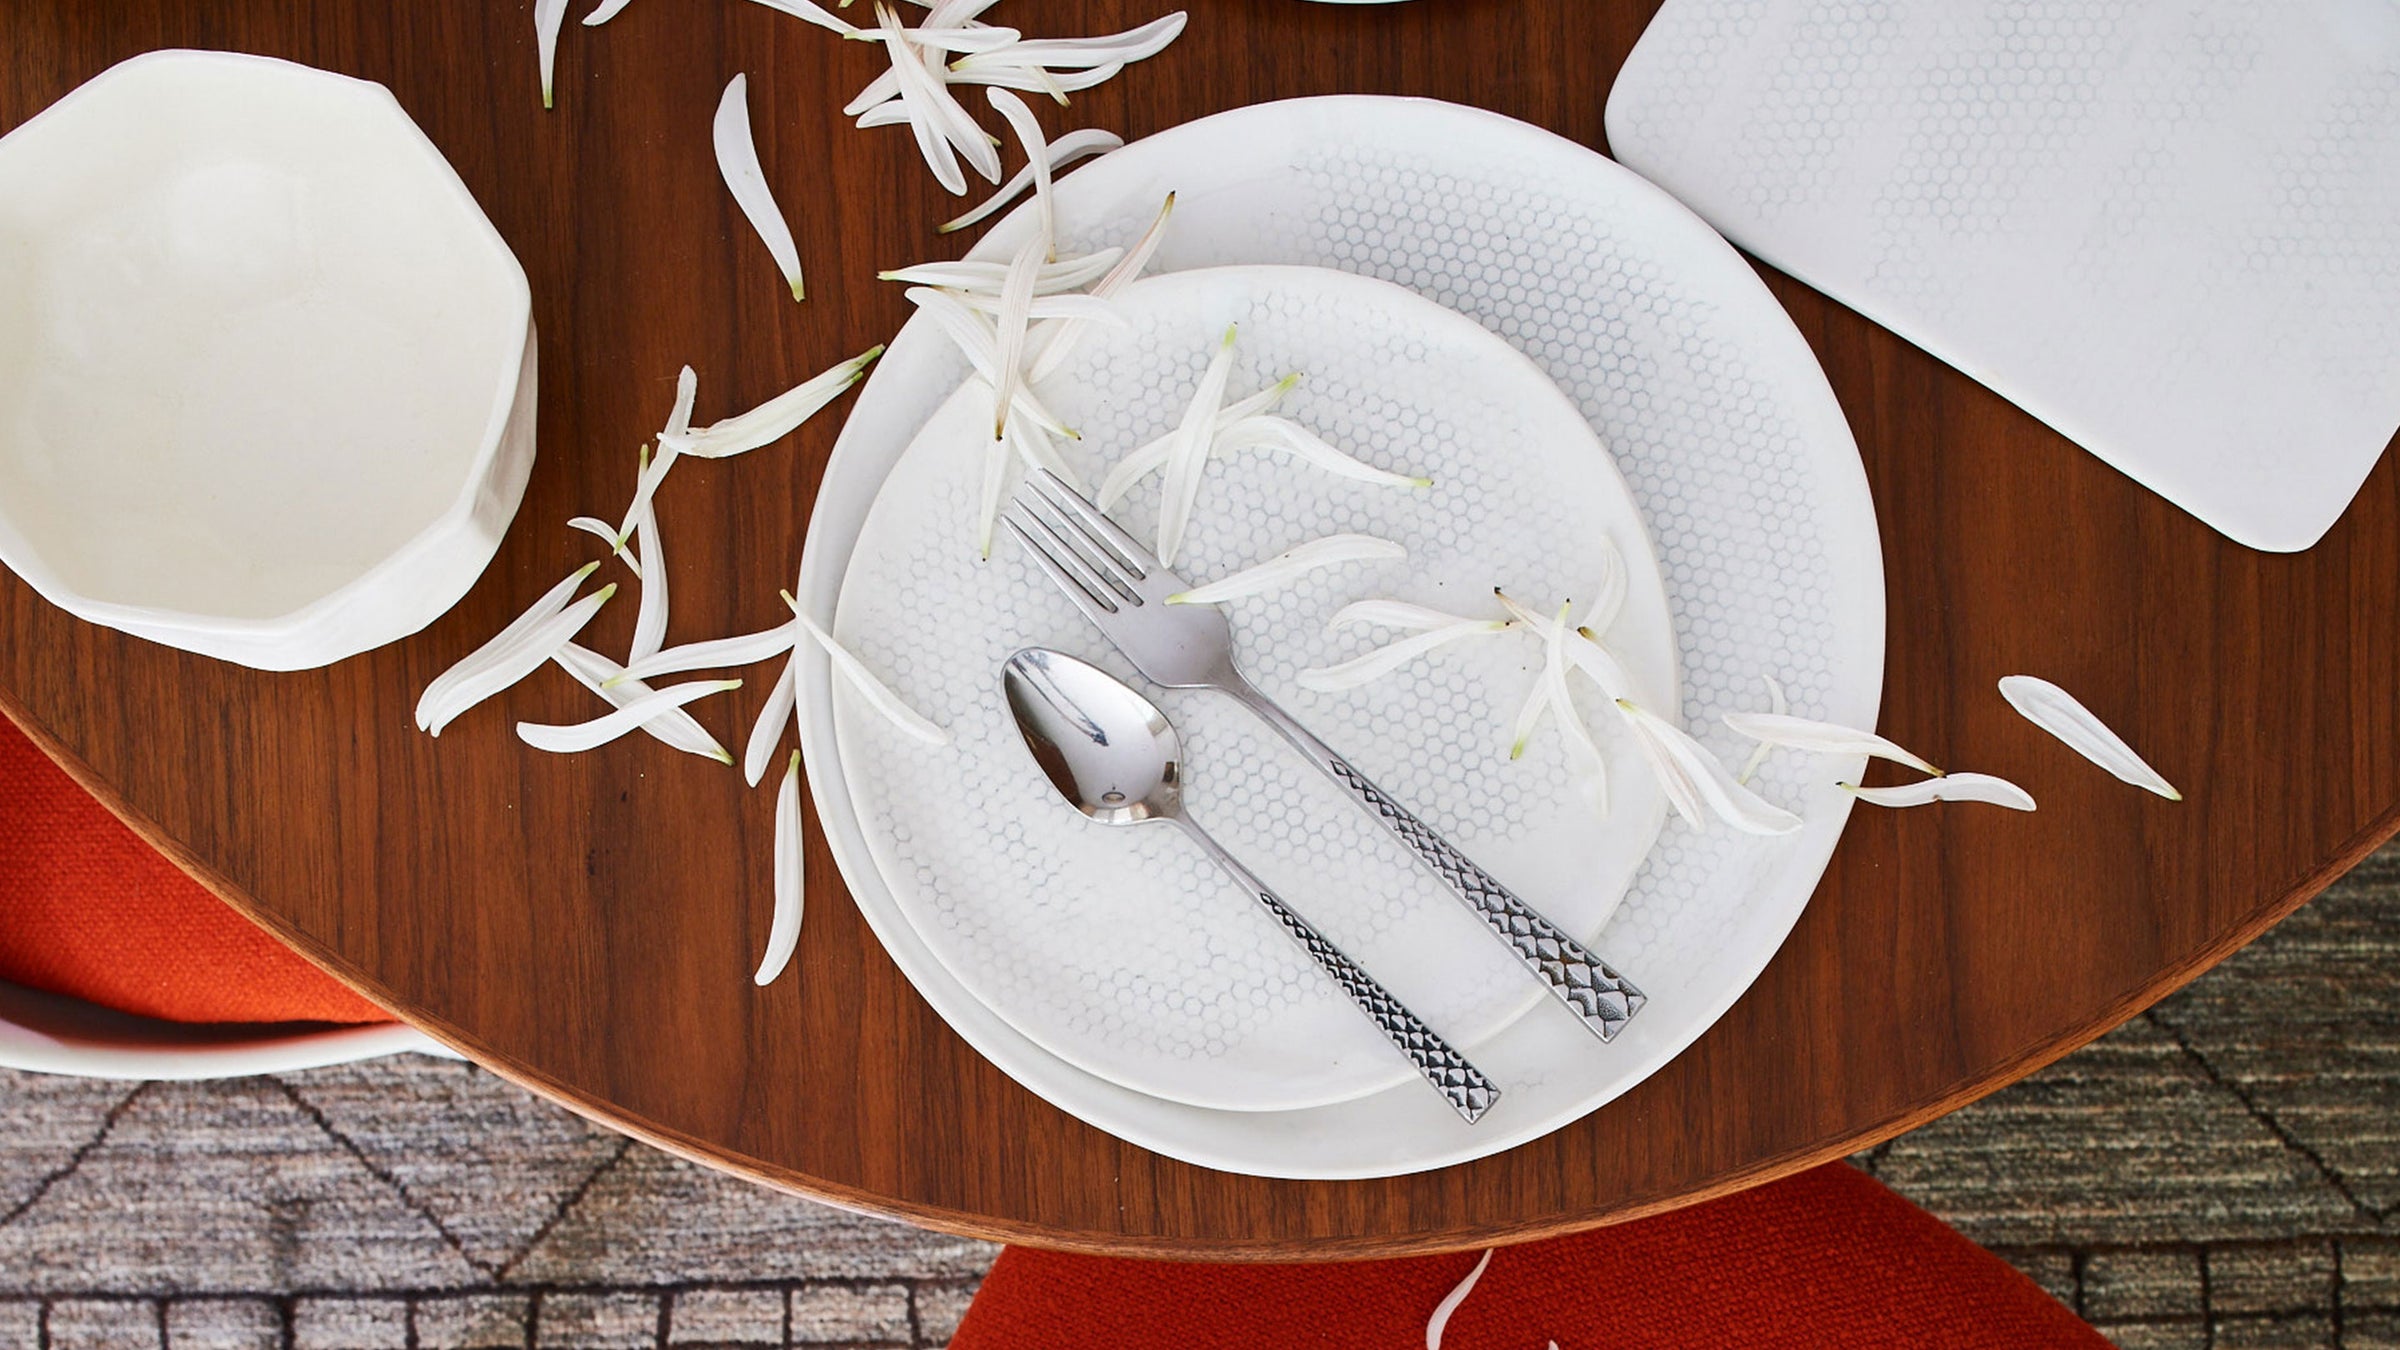 dbo home artisan ceramic honeycomb pattern plate on a wooden table with white leaves and vintage silverware